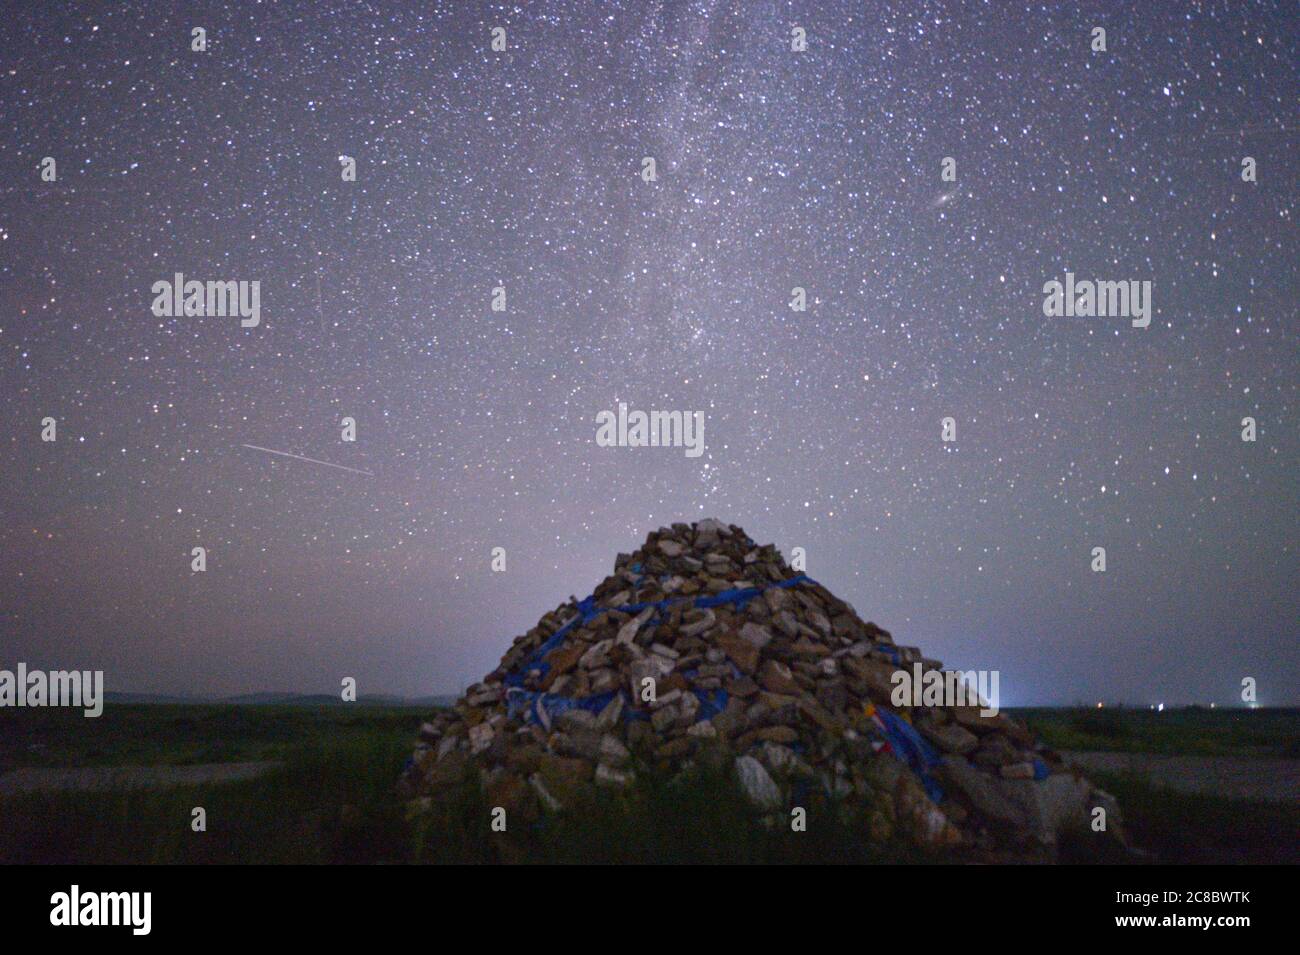 (200723) -- ZHENGLAN BANNER, July 23, 2020 (Xinhua) -- Photo taken on July 23, 2020 shows the site of Xanadu under the starry sky in Zhenglan Banner of Xilingol League, north China's Inner Mongolia Autonomous Region. Located in Zhenglan Banner of Xilingol League, north China's Inner Mongolia Autonomous Region, the relic site of Xanadu, or Yuan Shangdu ruins, is one of the best preserved sites of the capital cities of Yuan Dynasty (1271-1368) in China. Credit: Xinhua/Alamy Live News Stock Photo